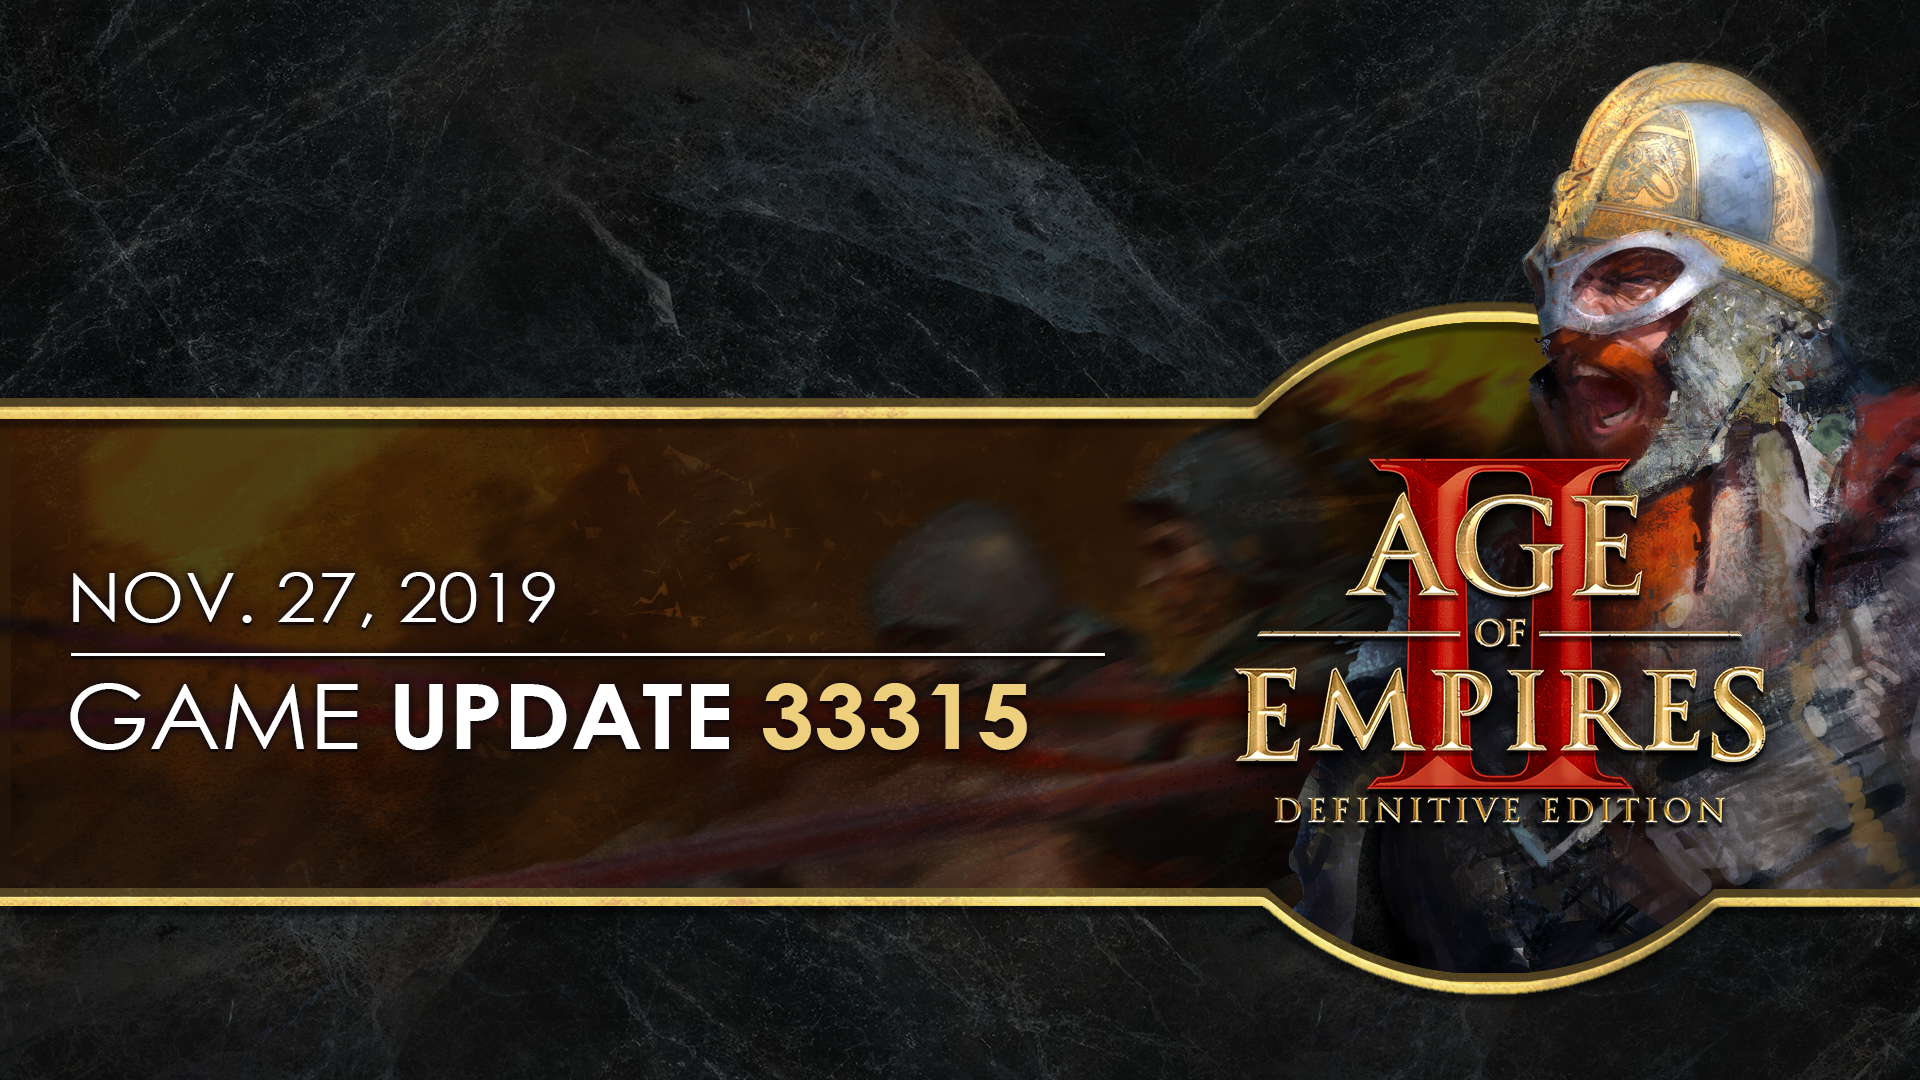 Age of empires 3 free download for android apk